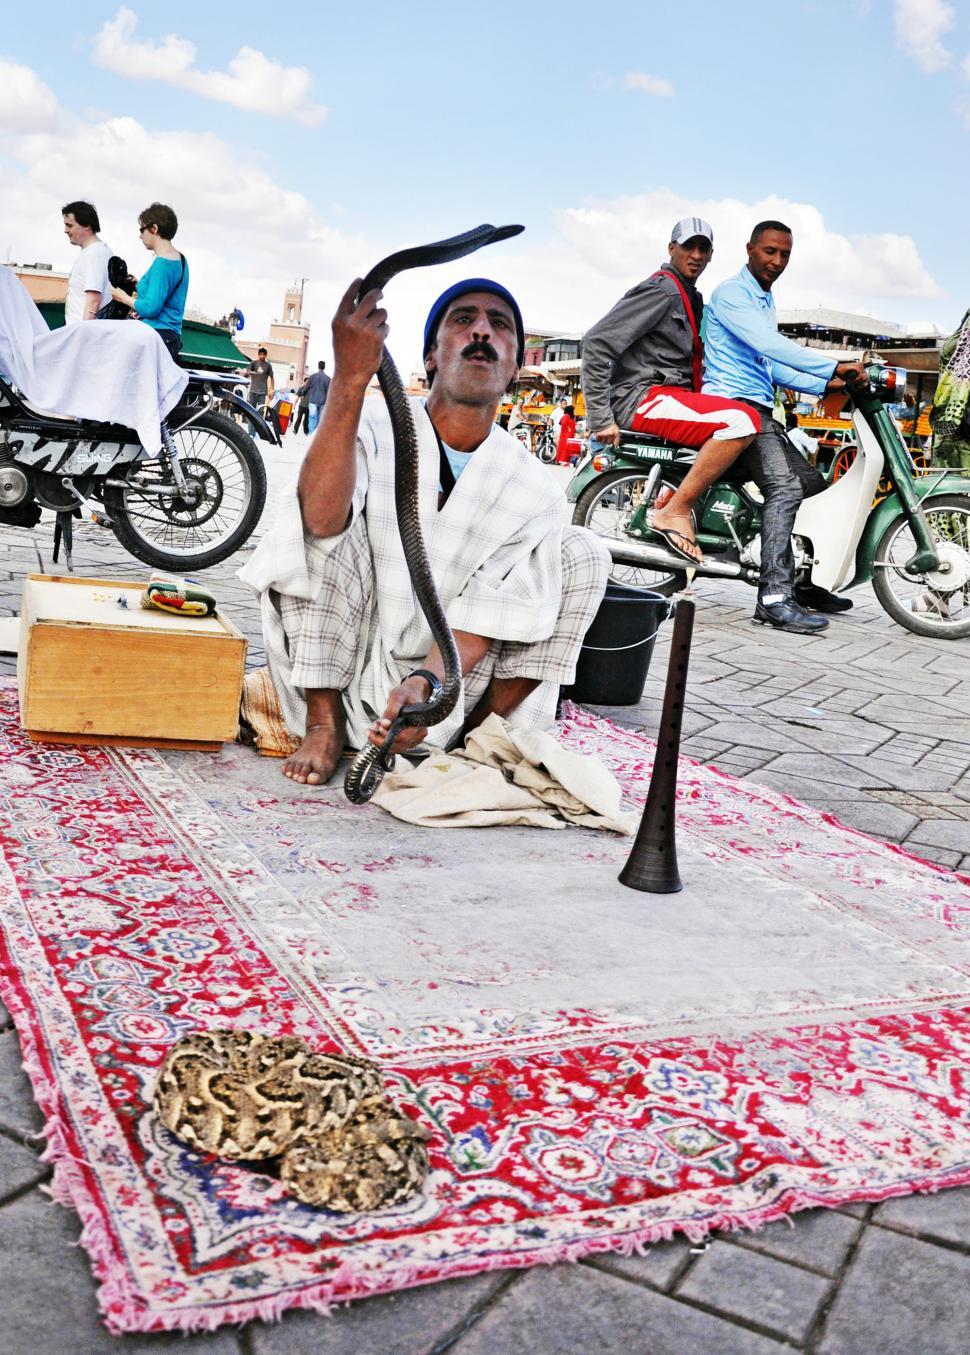 Free Image of Snake Charmer in morocco 